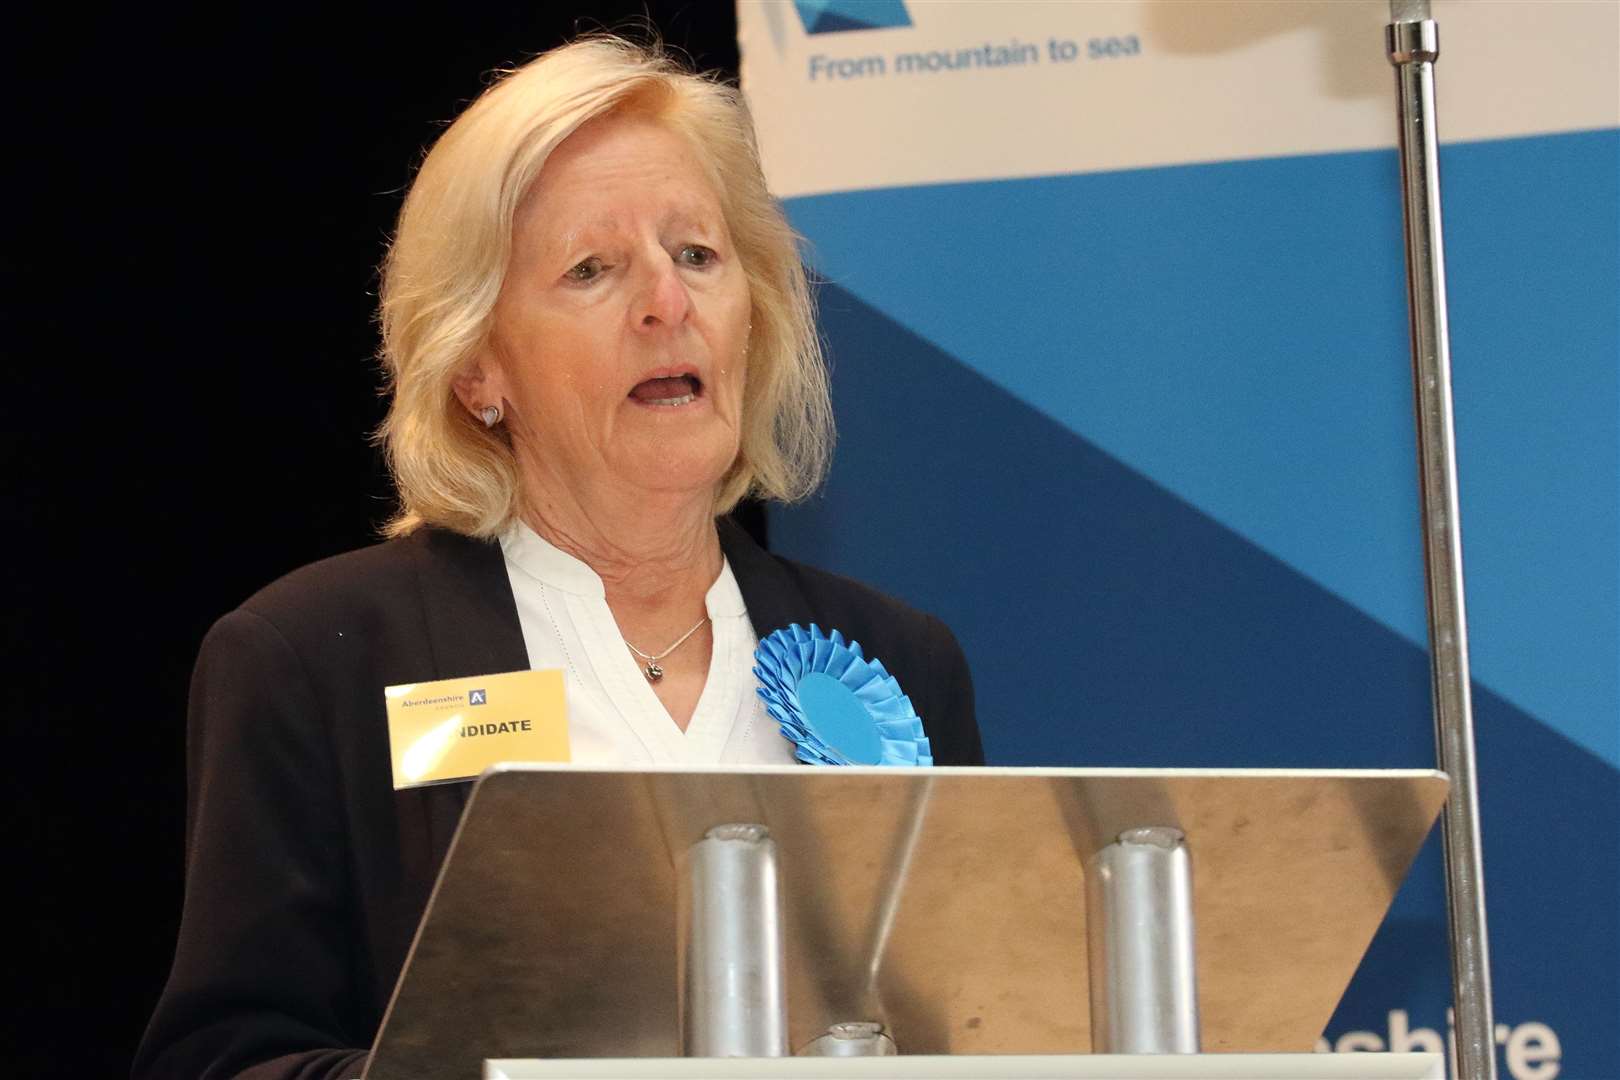 Sheila Powell thanked all those who had helped in the election